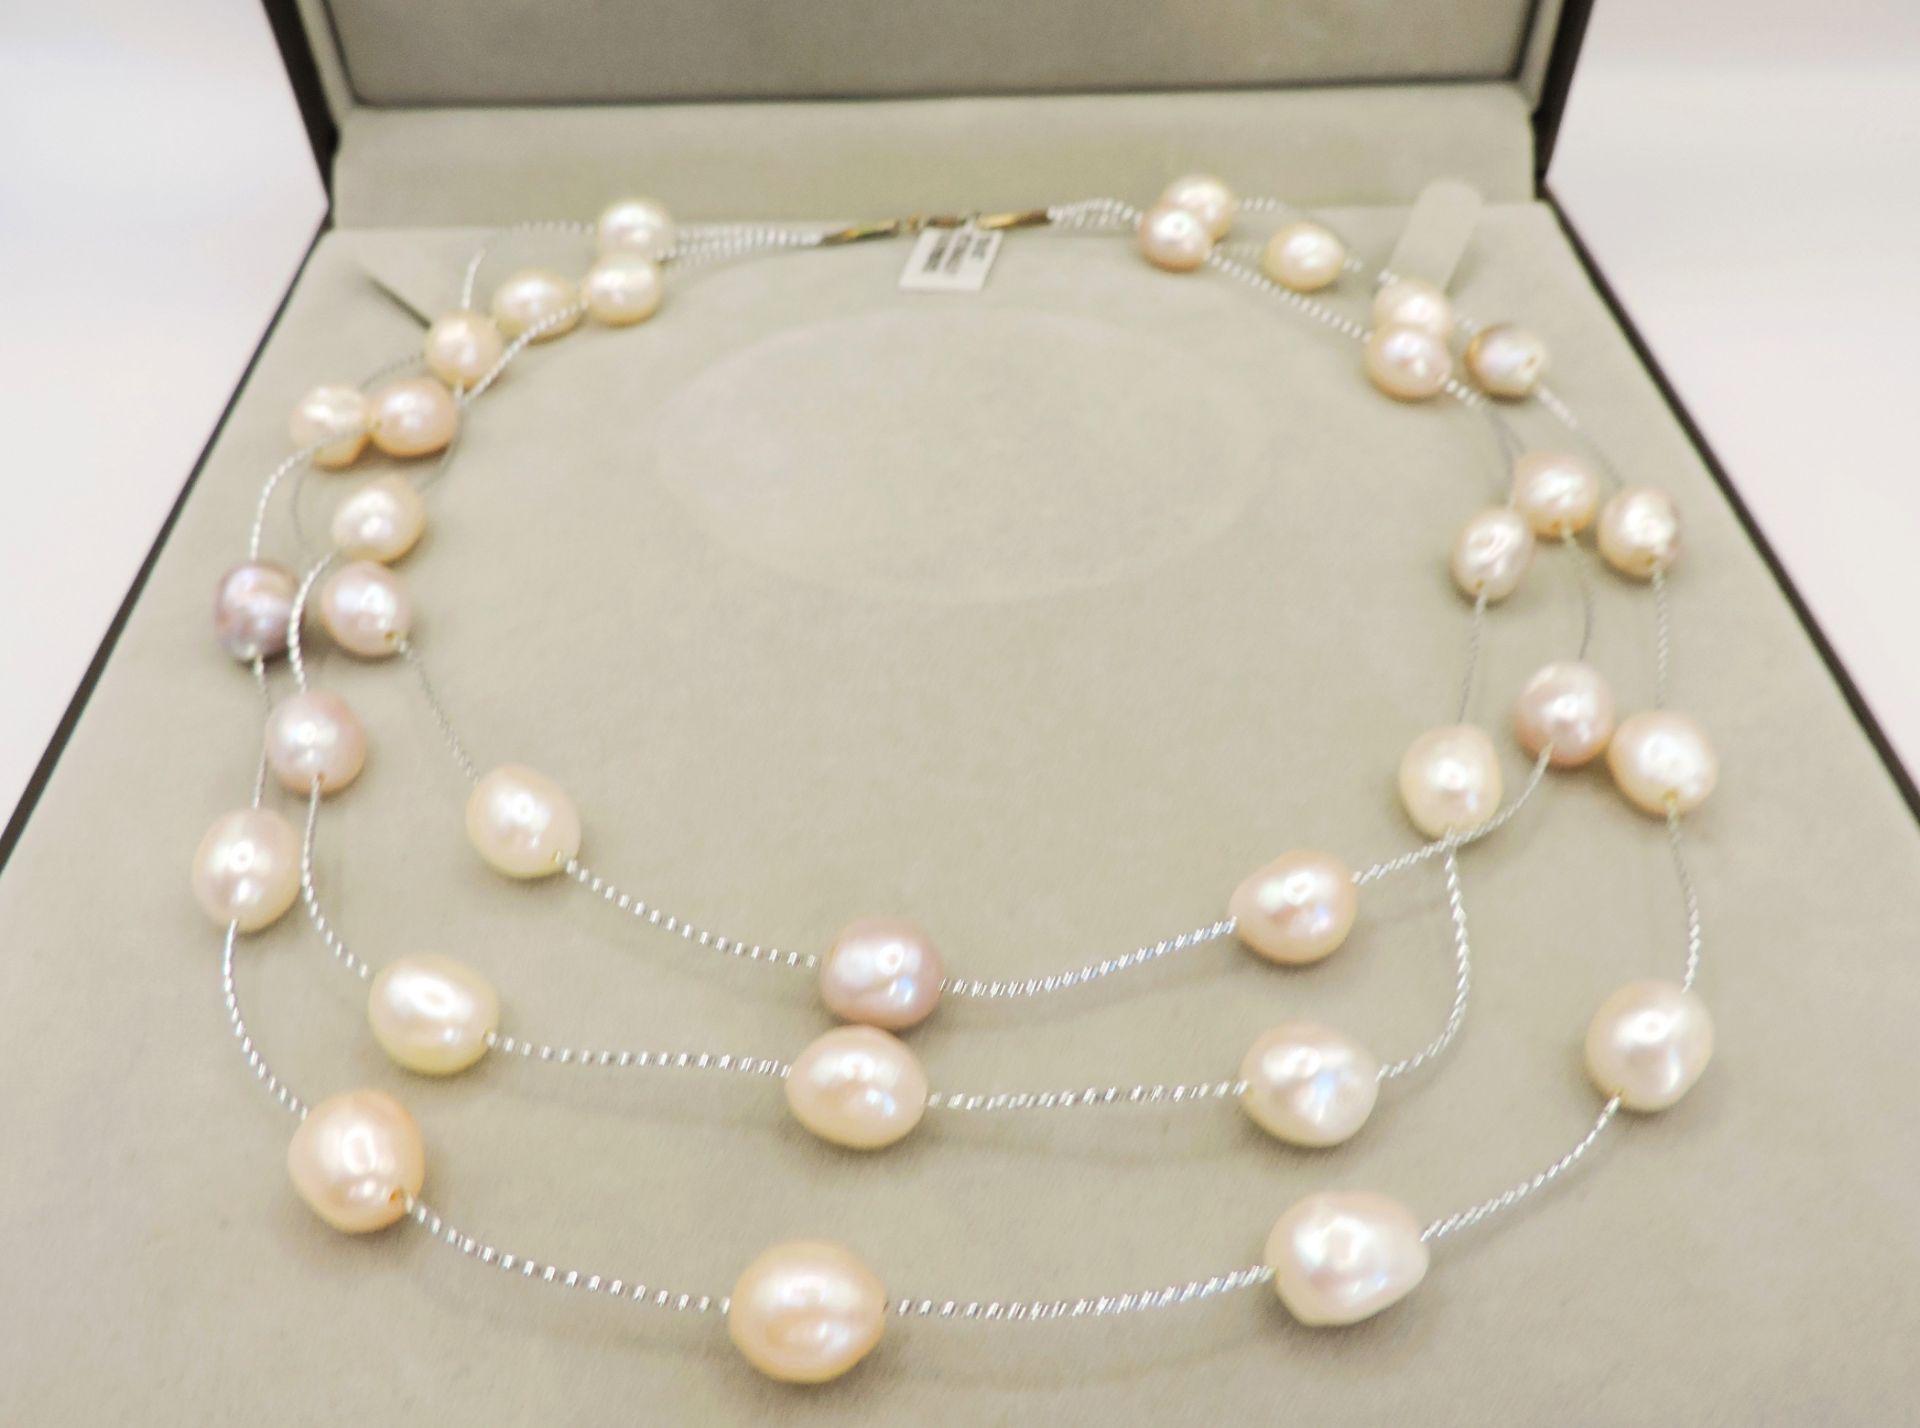 17 inch Cultured Pearl Necklace New with Gift Box - Image 3 of 3